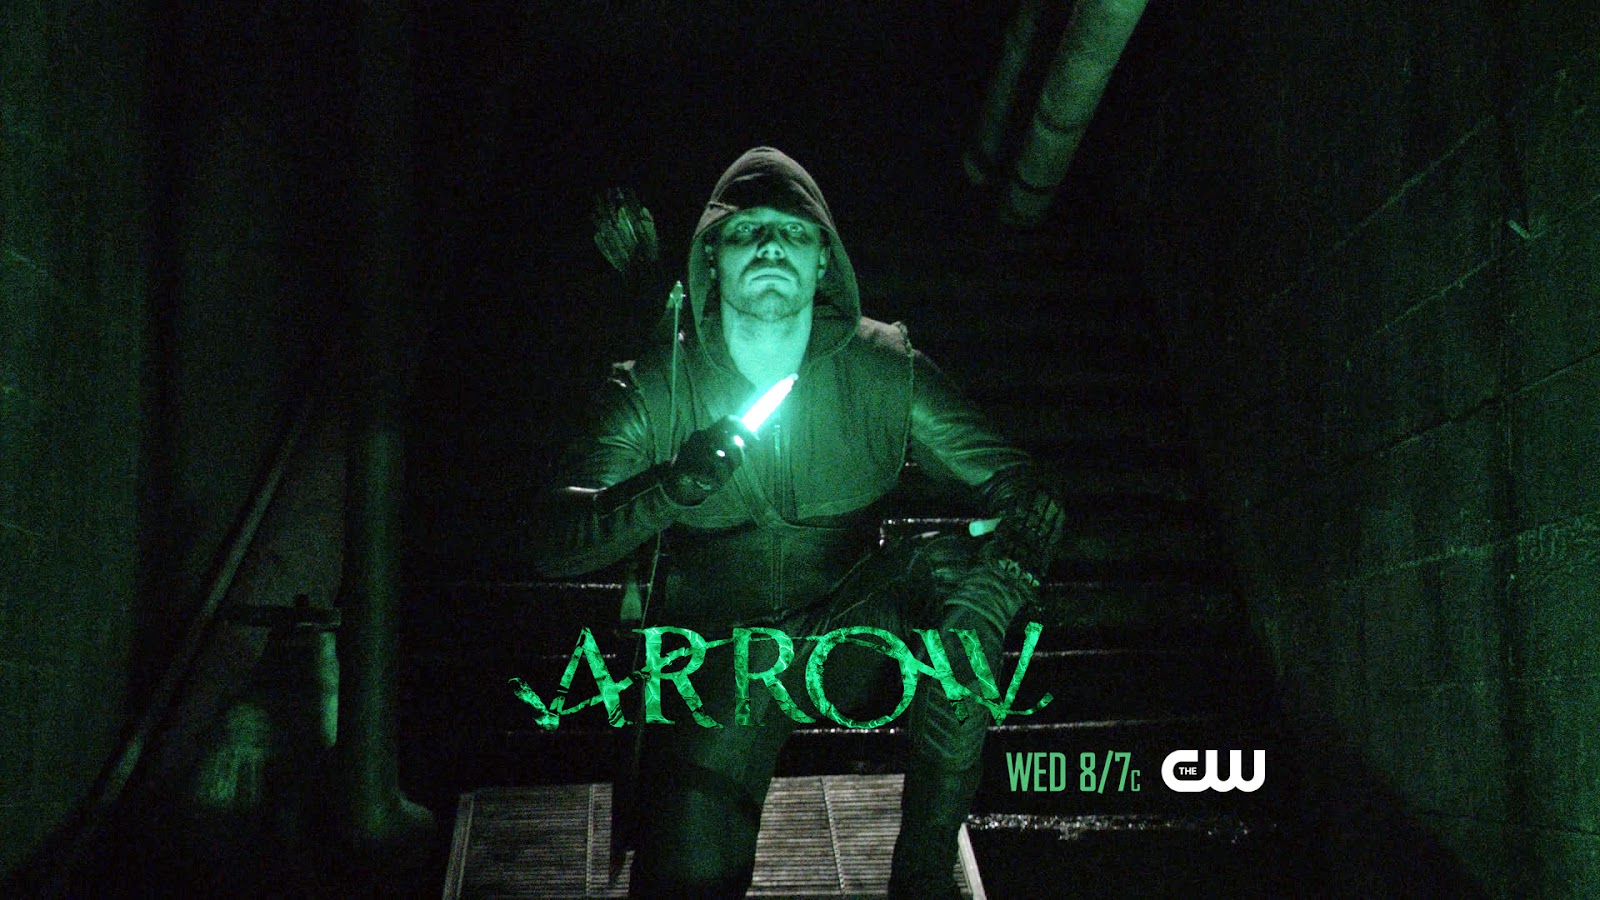 Arrow is an American television series which is based on DC Comics 1600x900